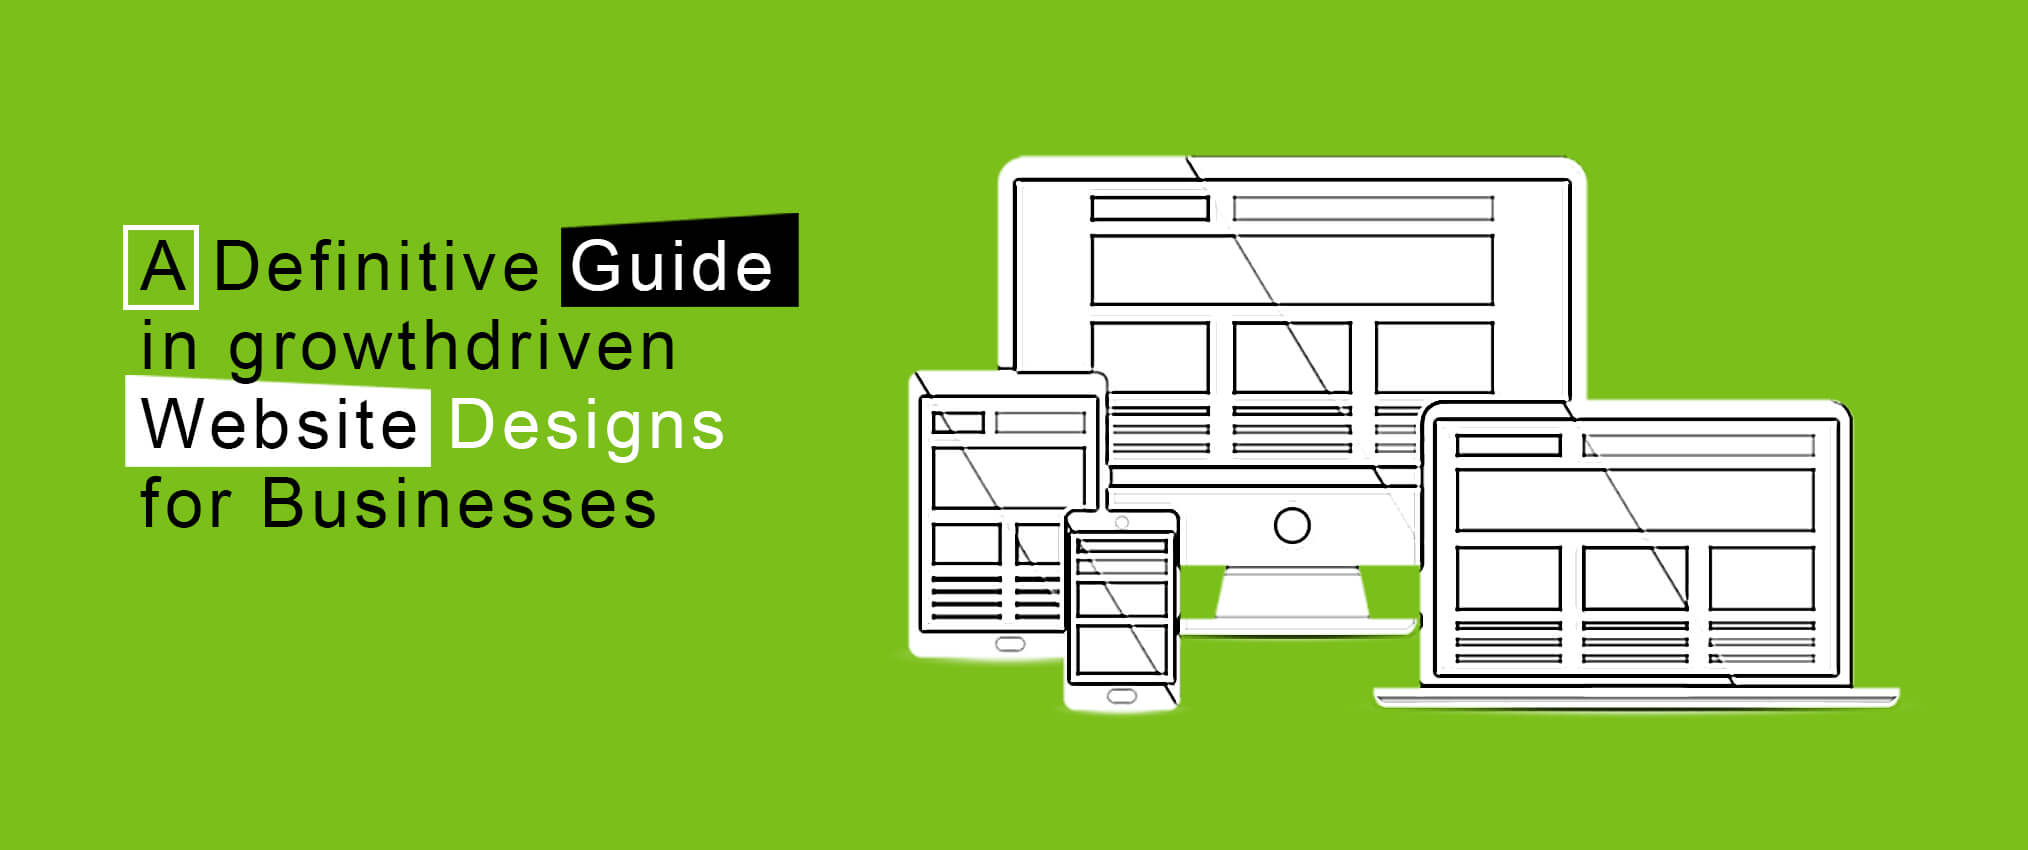 A Definitive Guide in growth driven Website Designs for Businesses